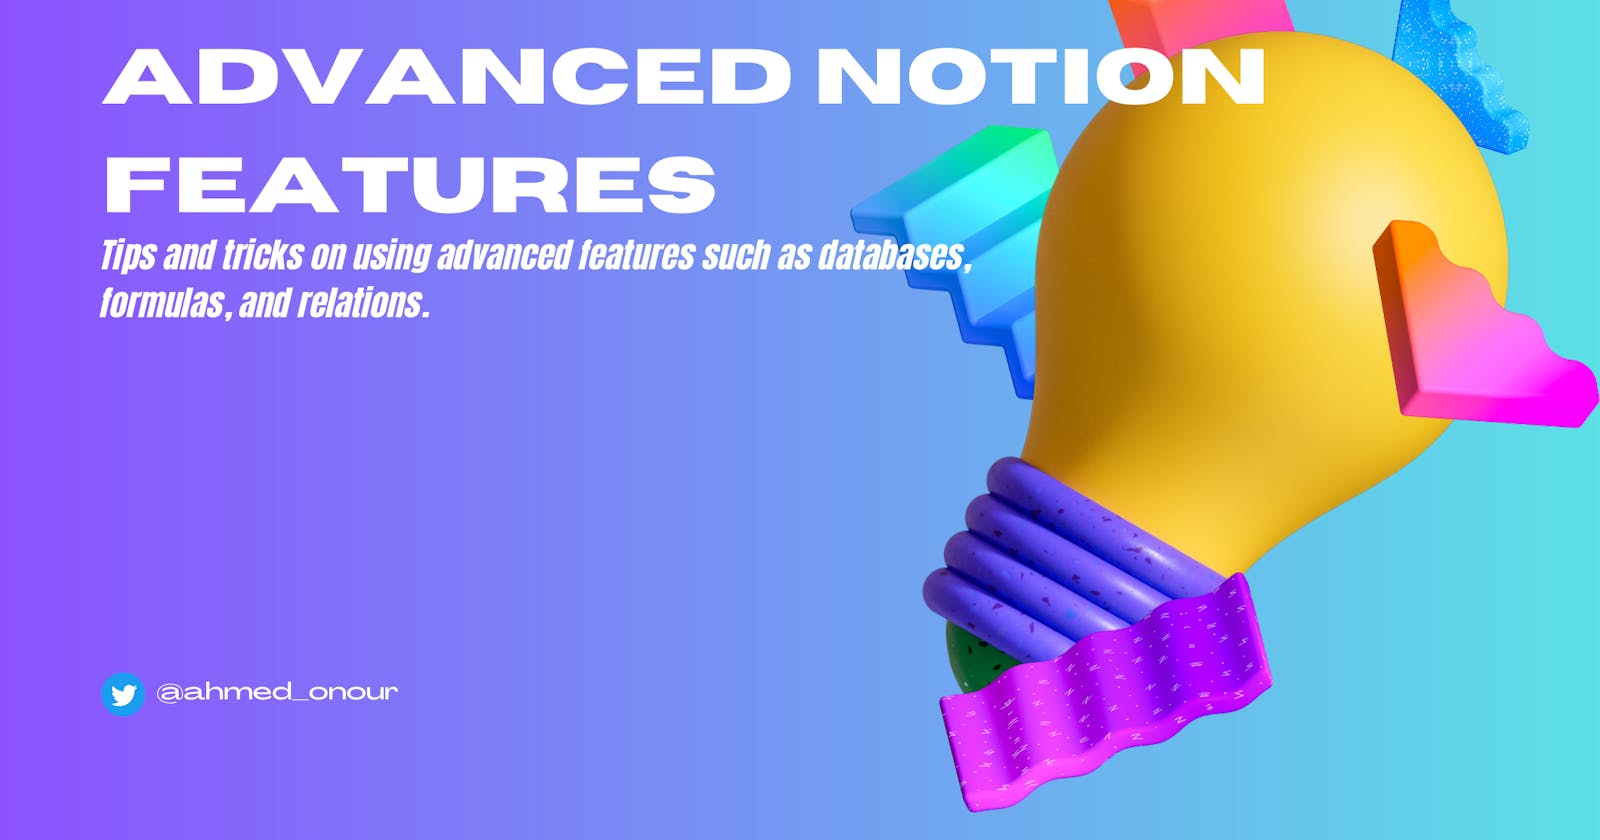 Advanced Notion Features